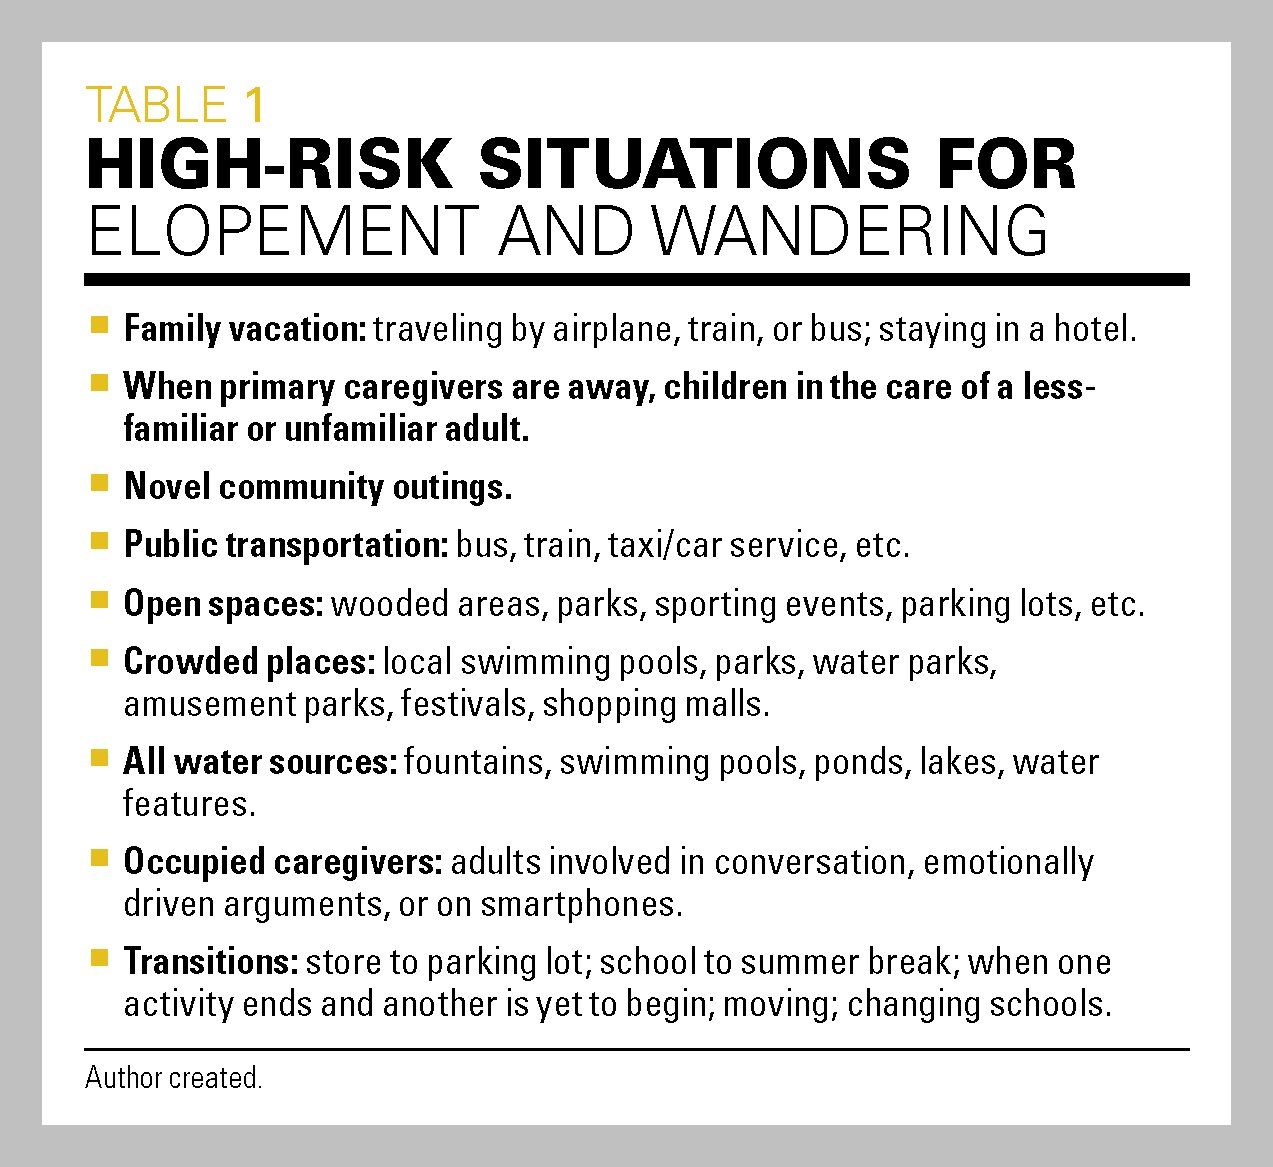 table looking at High-risk situations for elopement and wandering